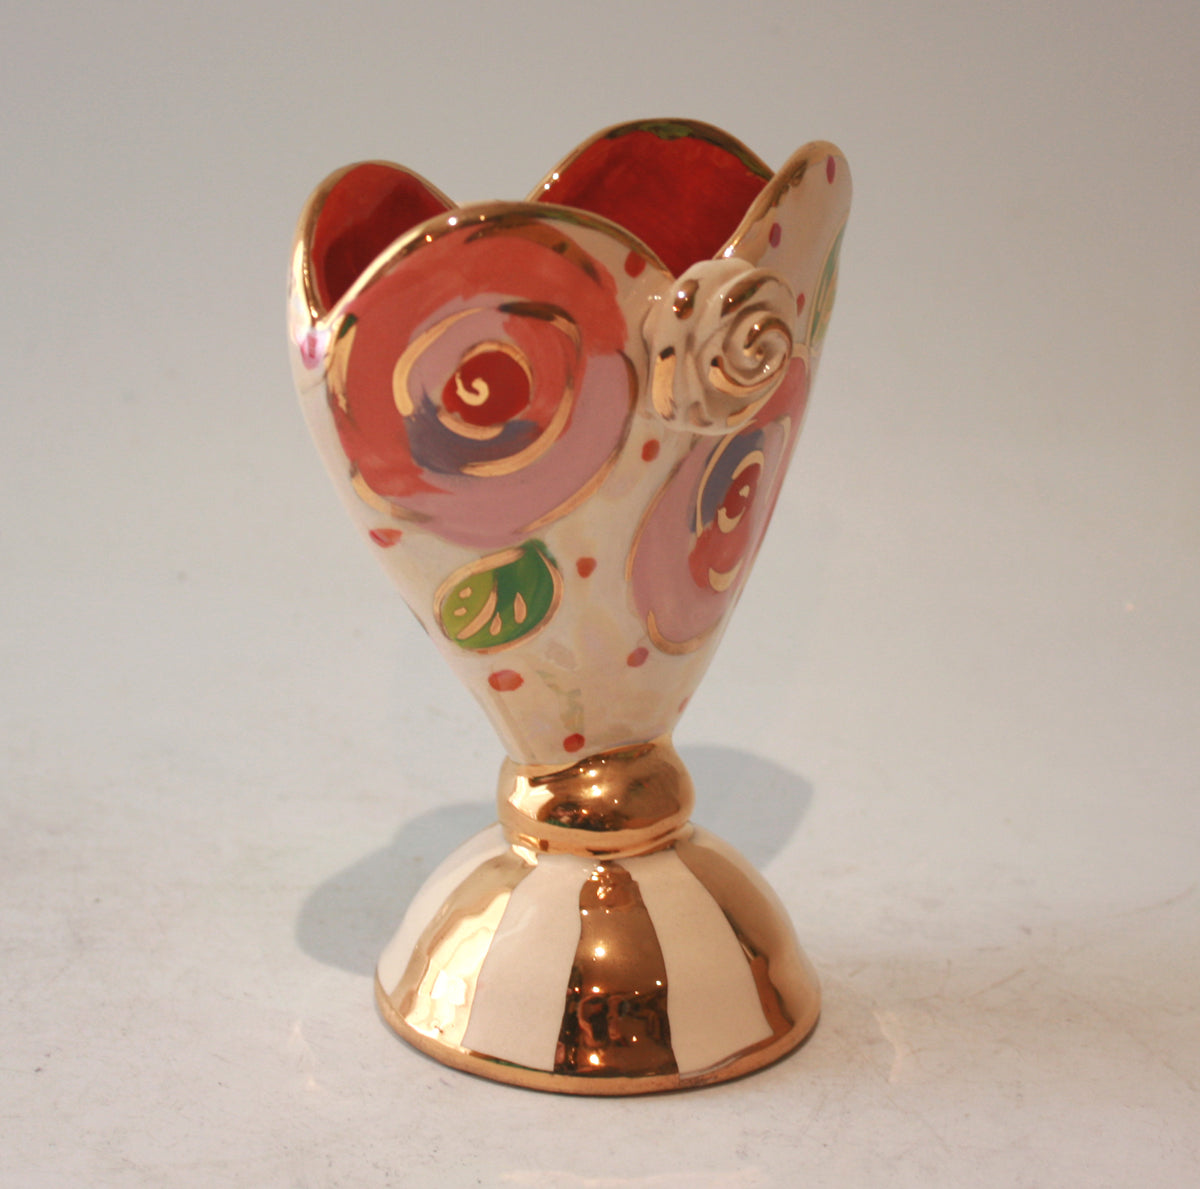 Baby Heart Vase in Gold New Rose on Pink Dots